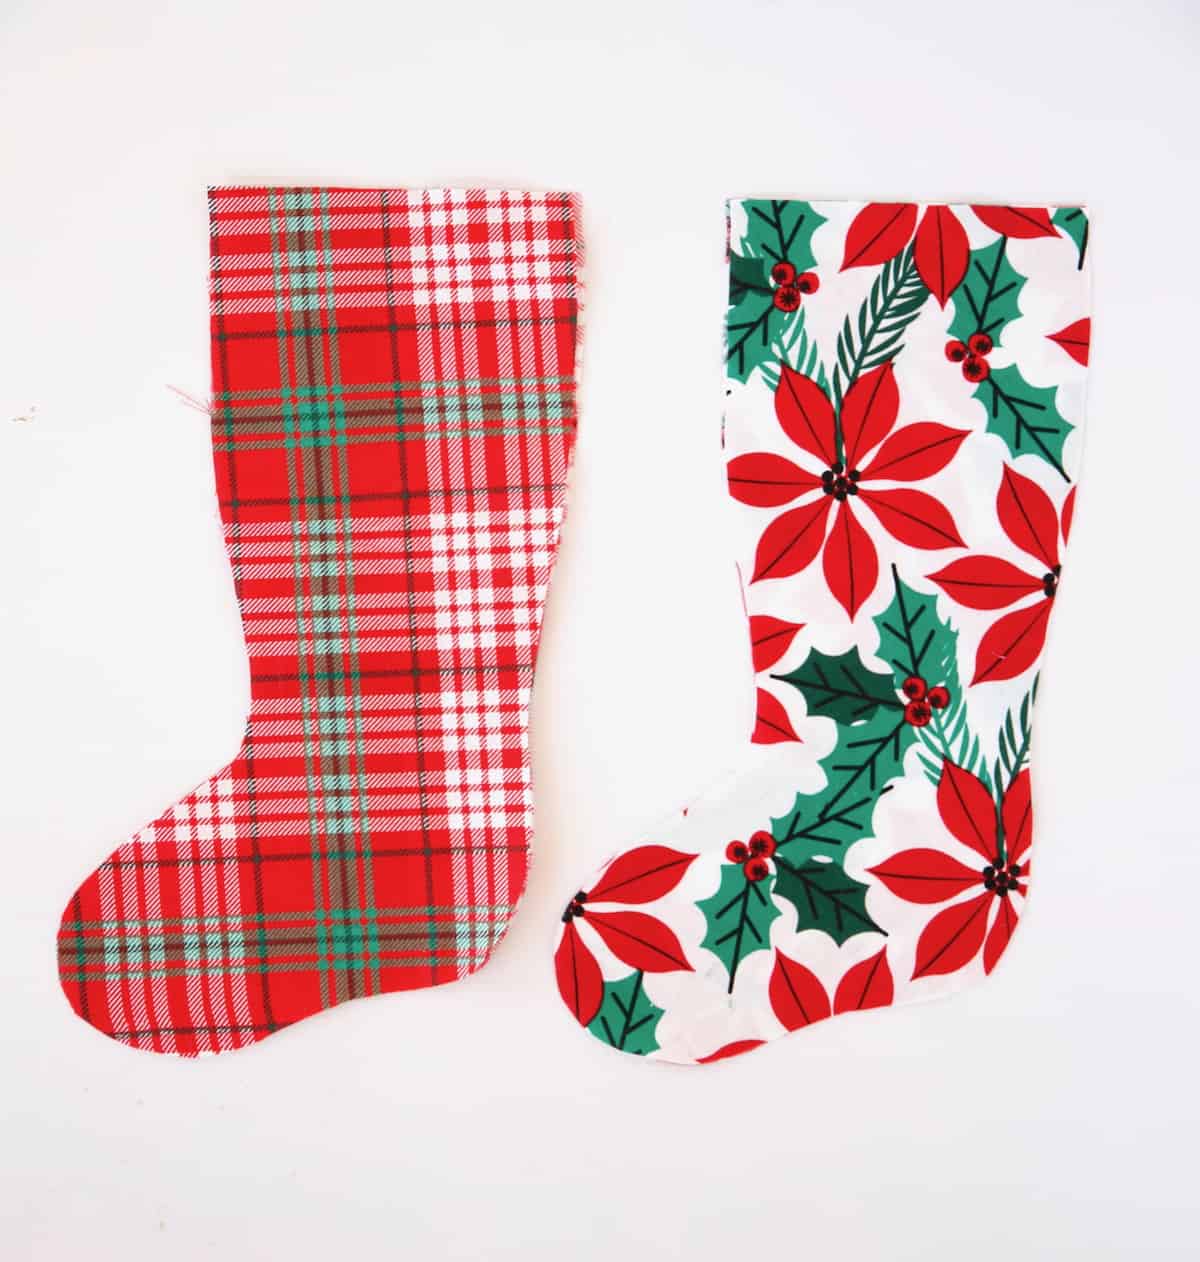 two pieces of fabric cut in stocking shape